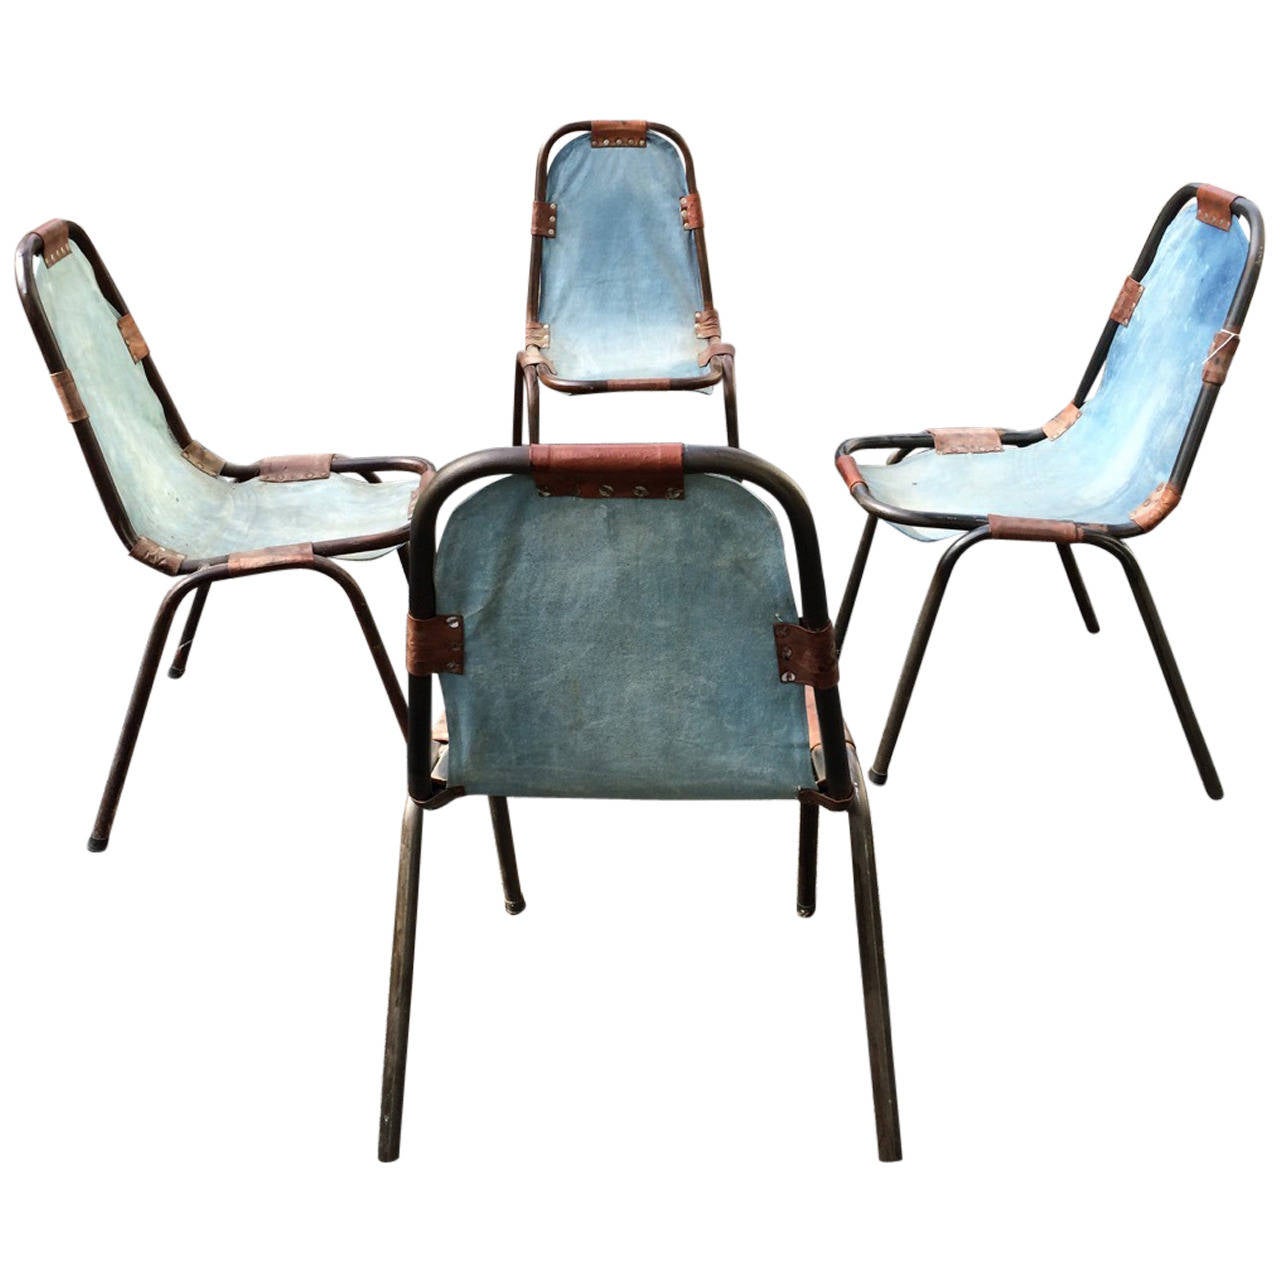 Charlotte Perriand Style Denim Deck Chairs, Sold as Set of Four